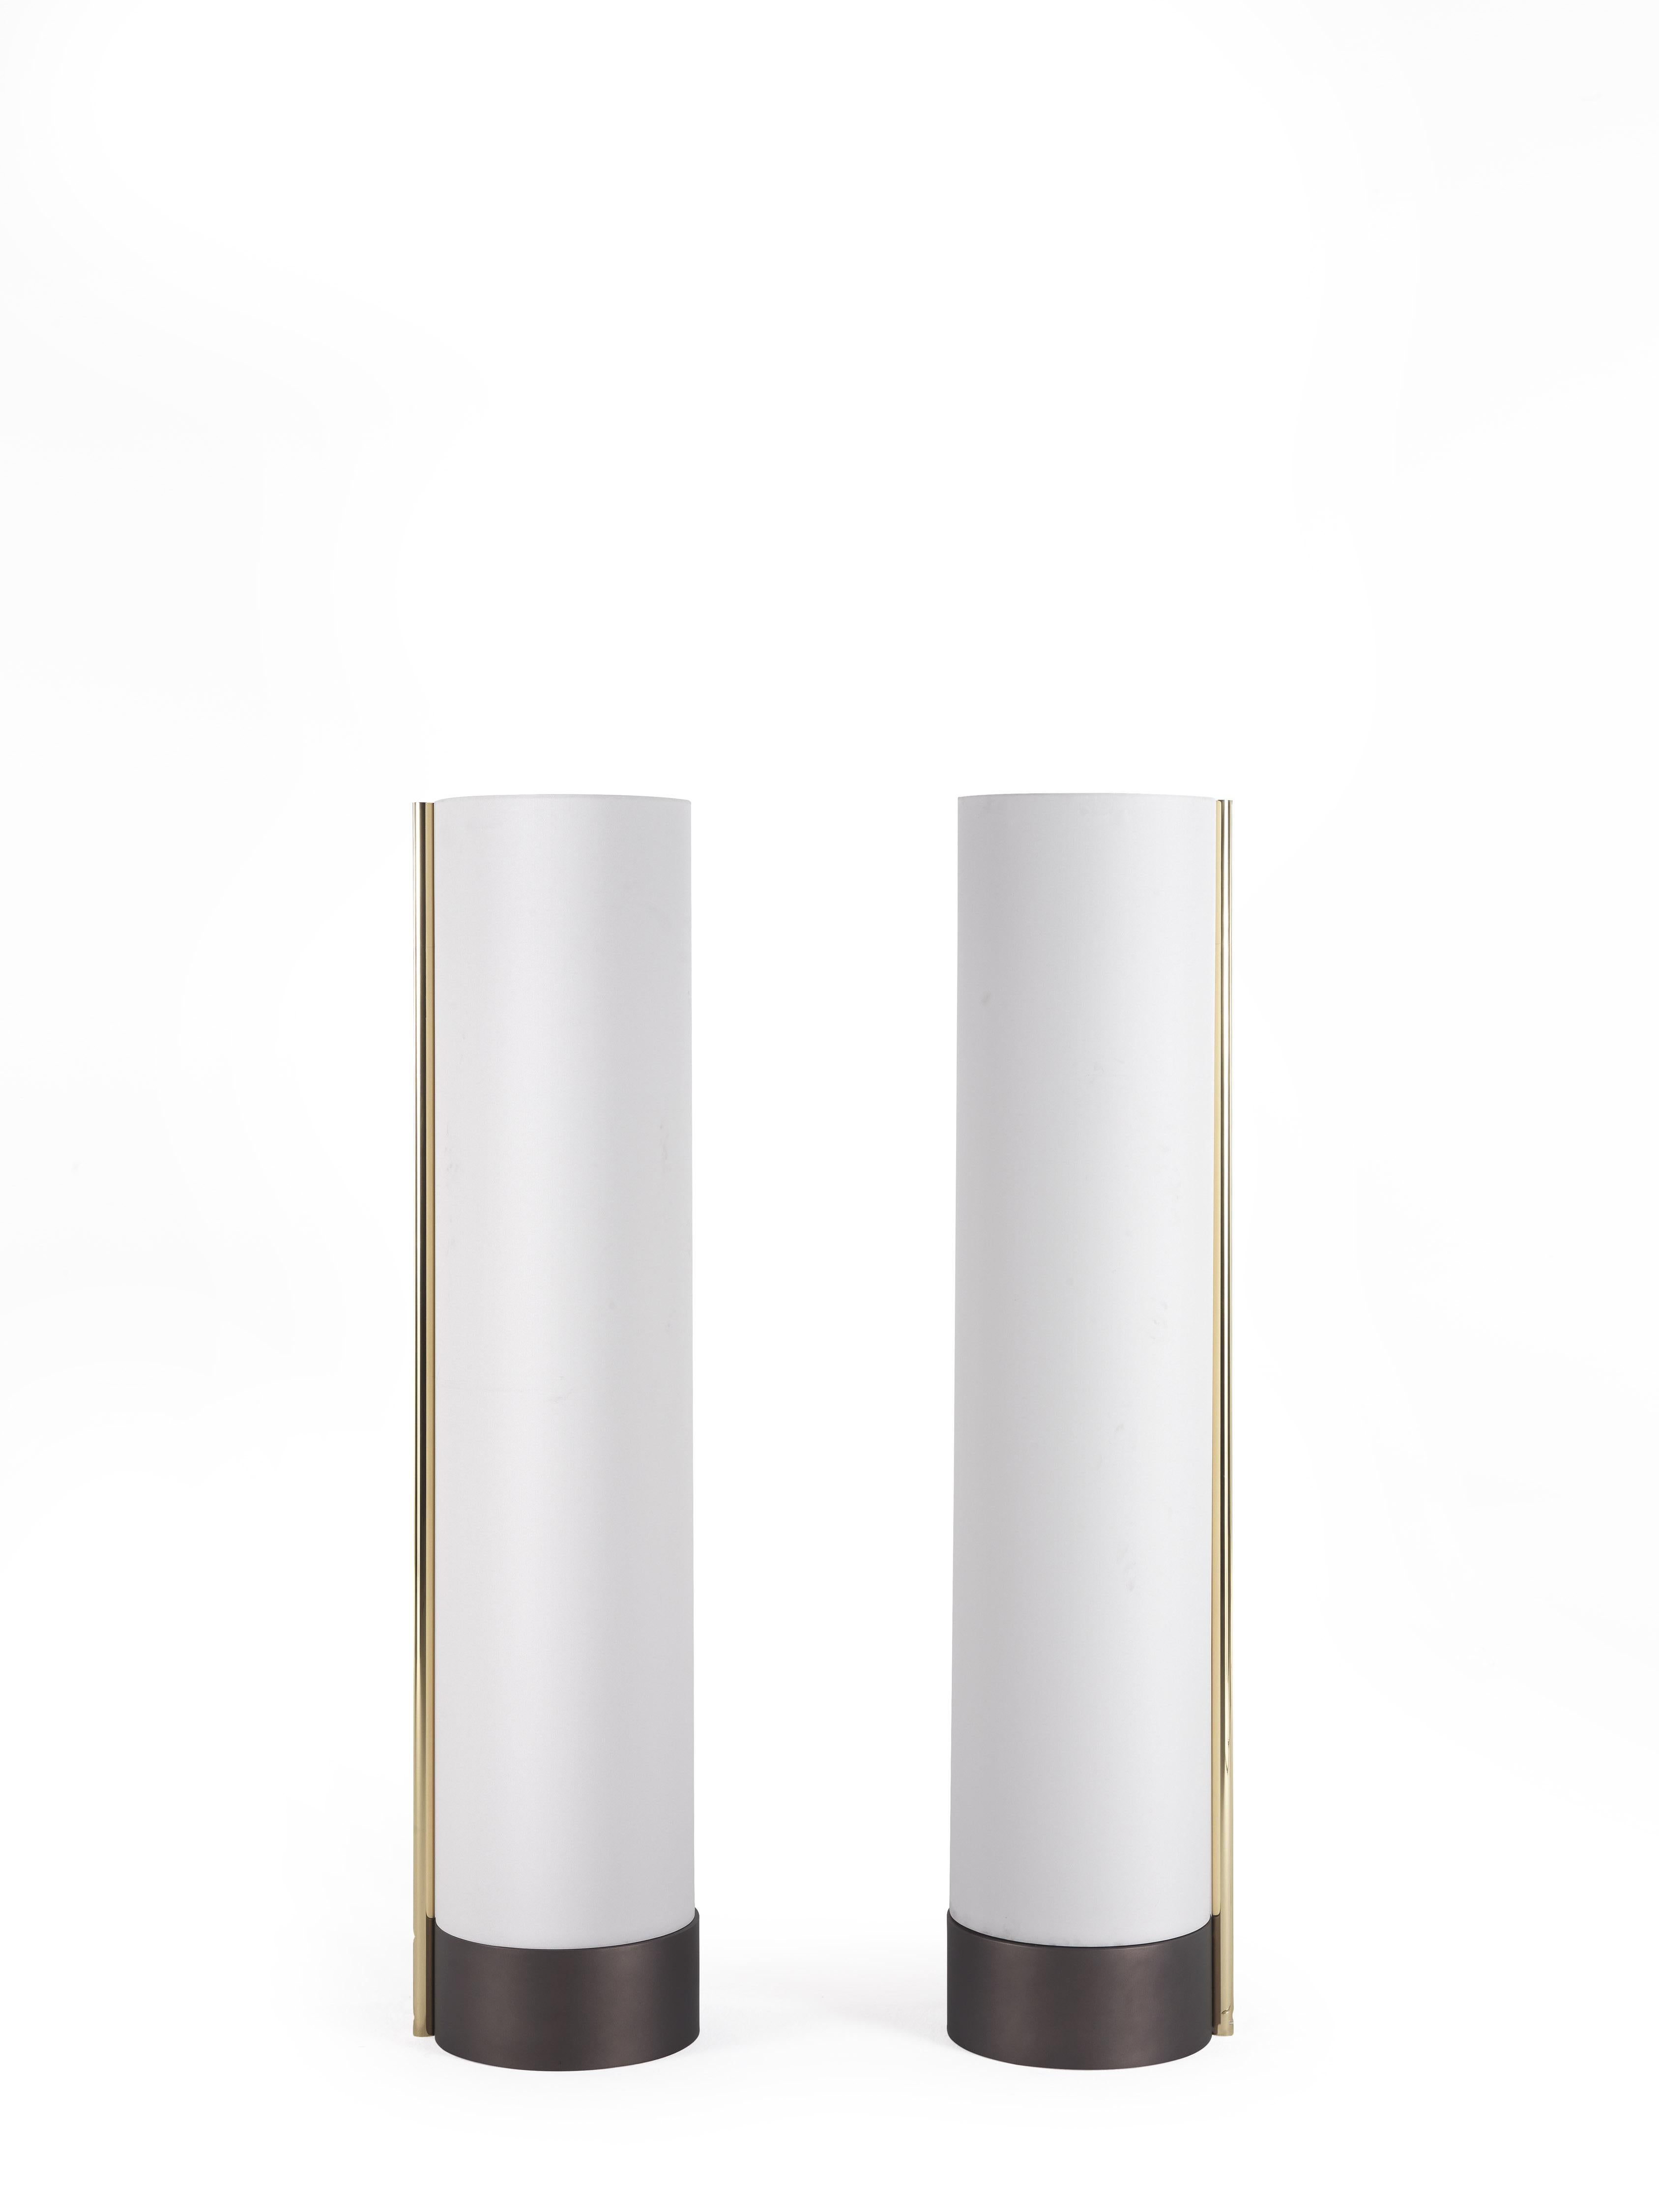 Base in metal with dark bronzed finishing. Shade in white fabric with bar in glossy brass.